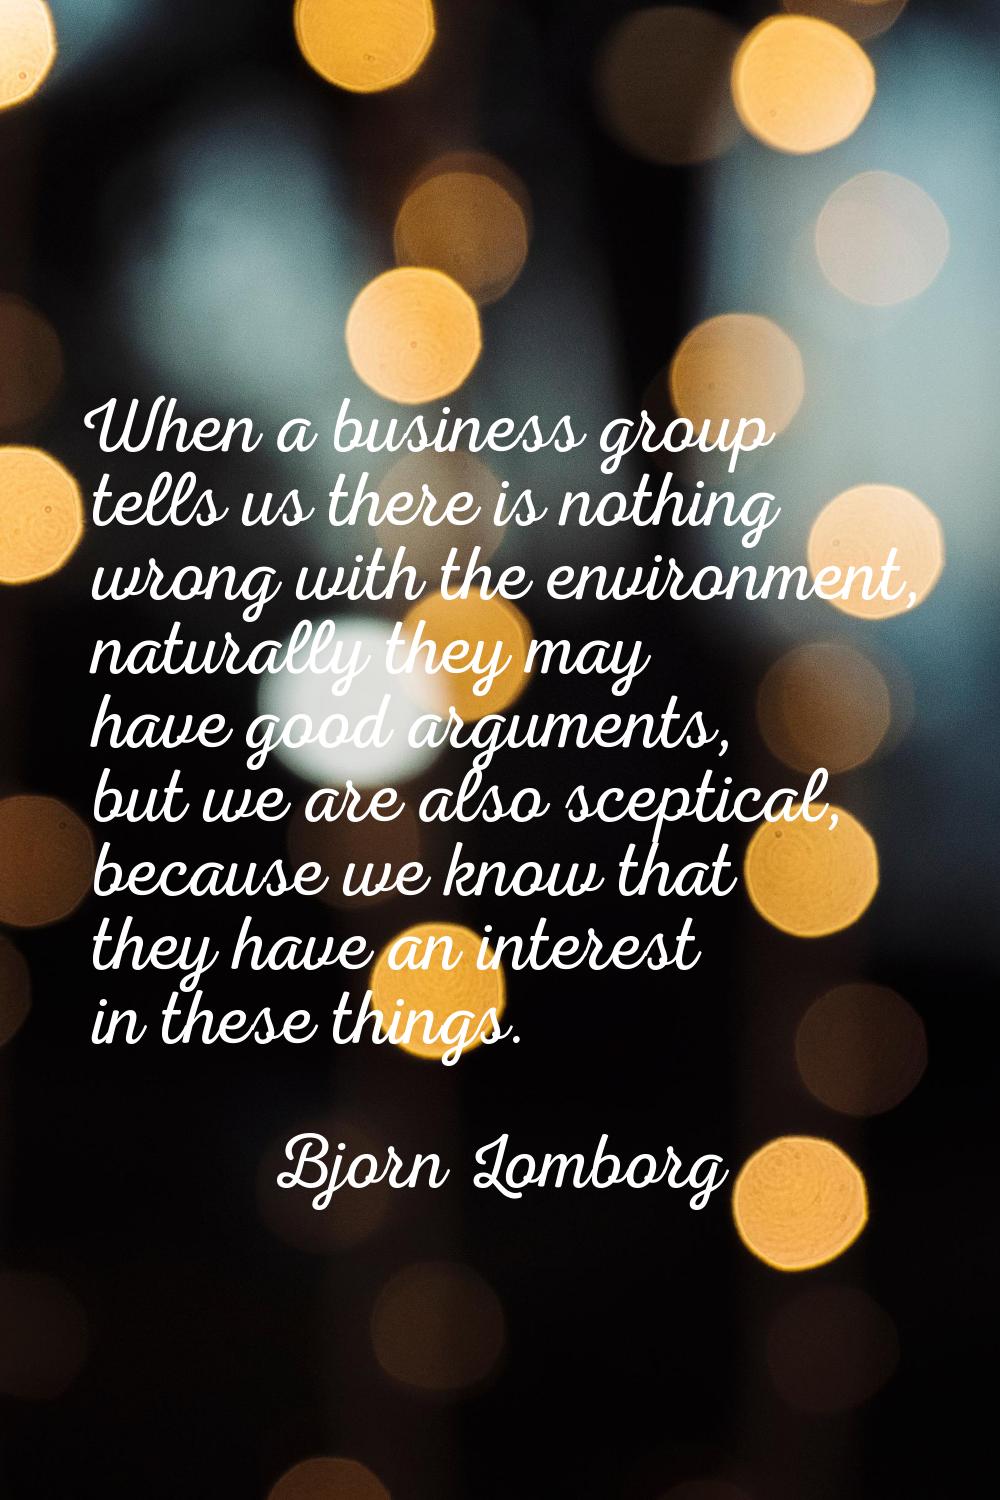 When a business group tells us there is nothing wrong with the environment, naturally they may have